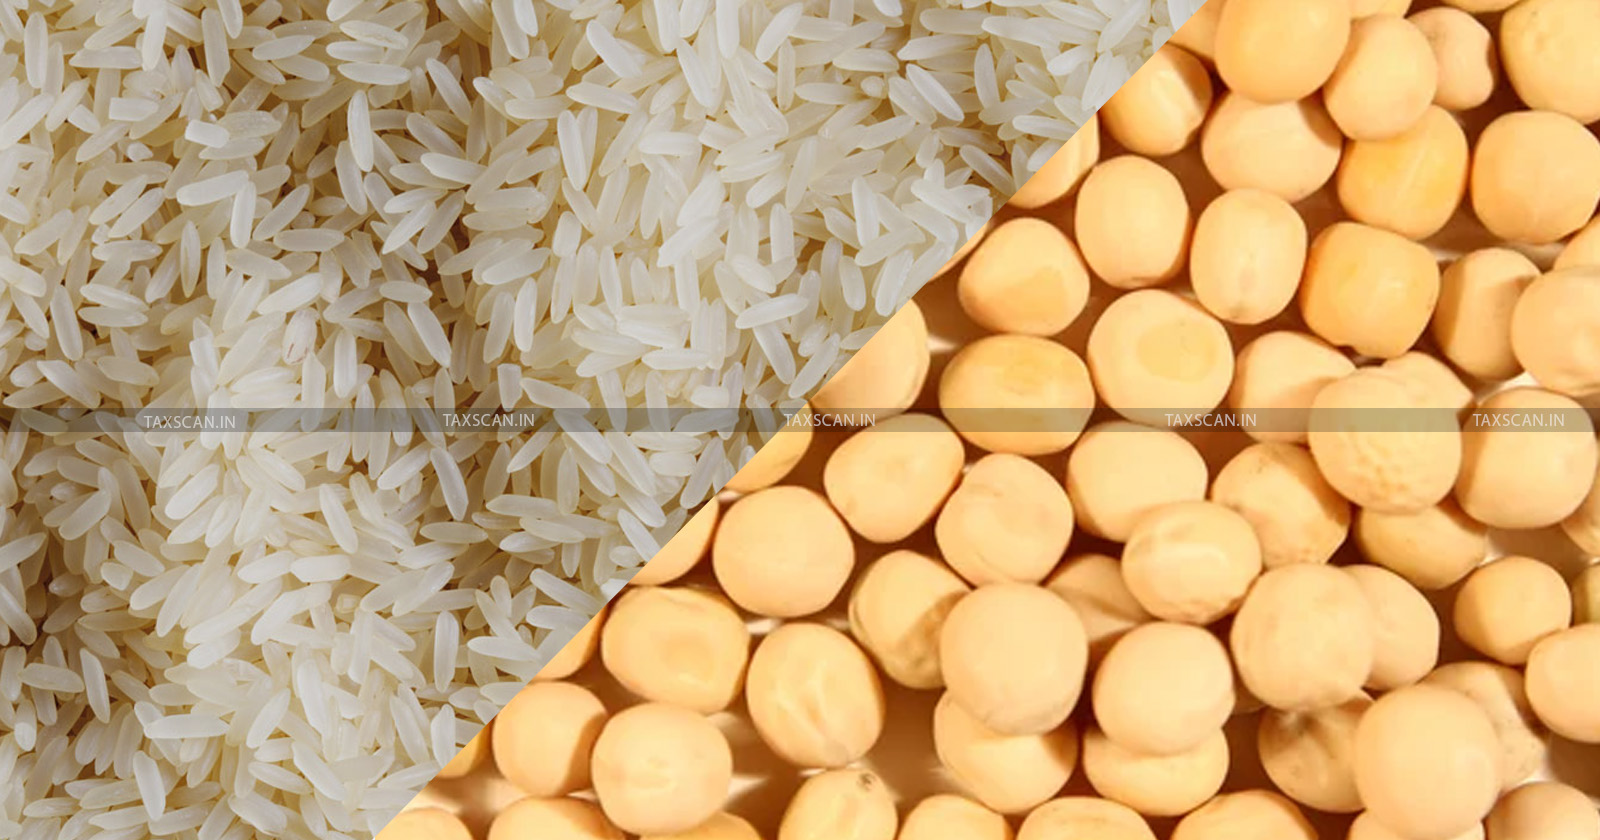 Export Duty - Parboiled Rice - Yellow Peas Imports - CBIC Notifies - taxscan